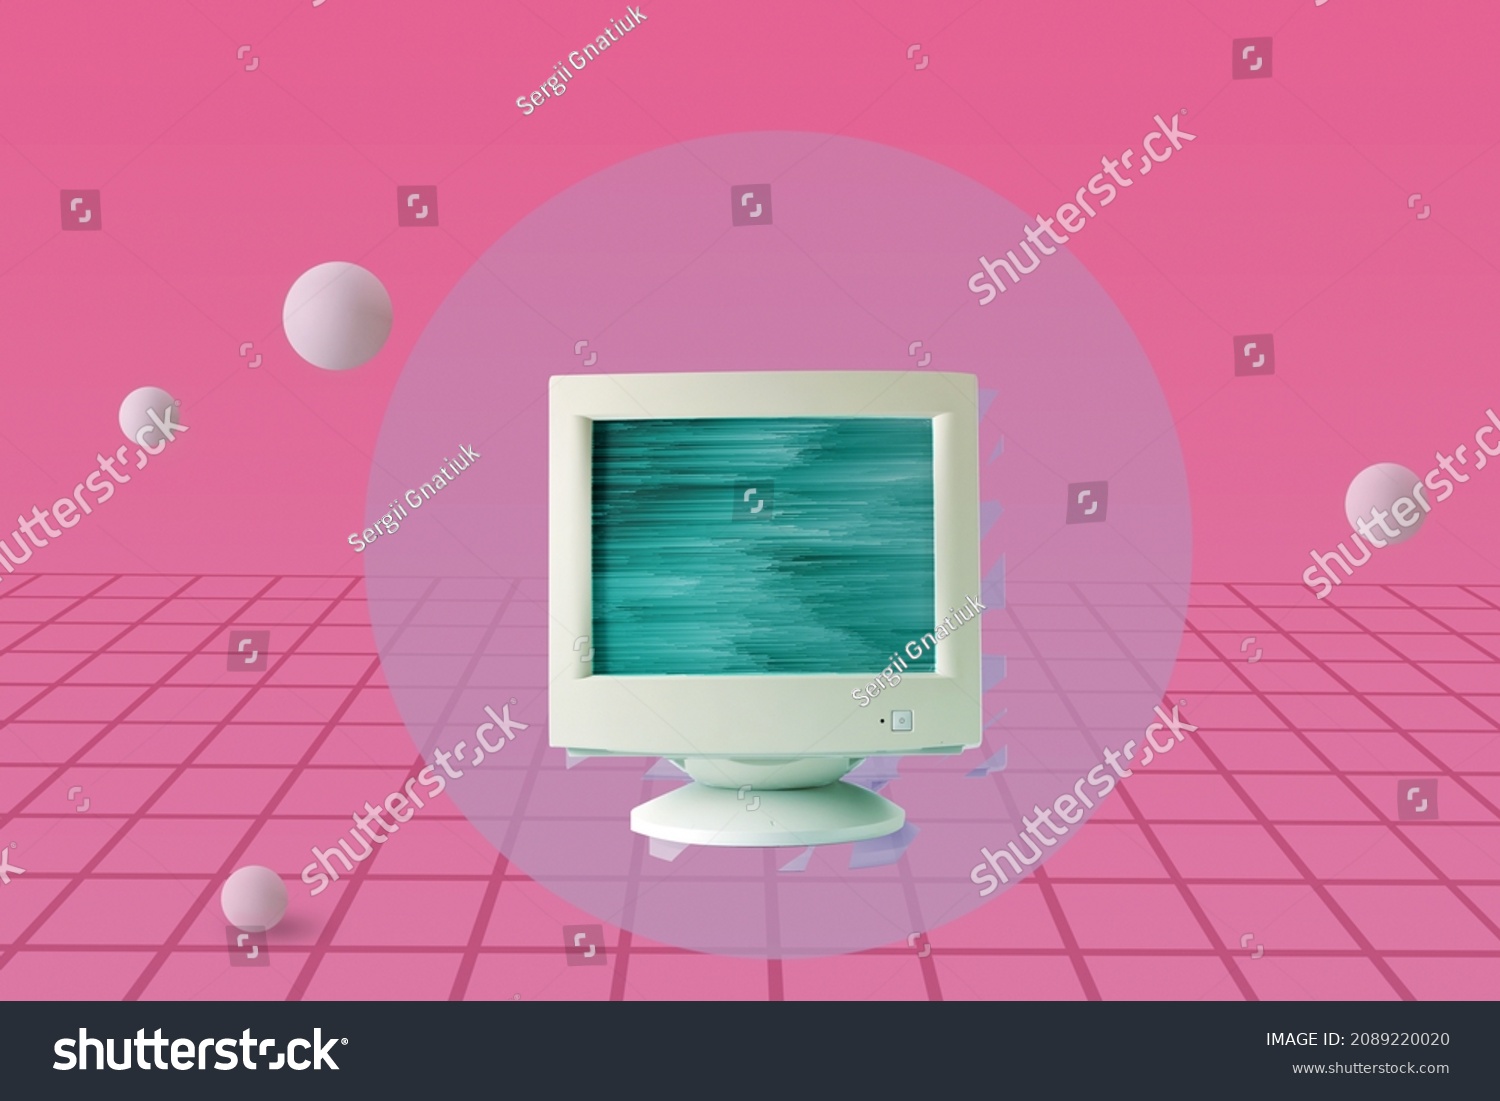 Glitch on retro computer screen in collage of vaporwave on pacific pink background. Minimal futuristic retrowave concept. #2089220020